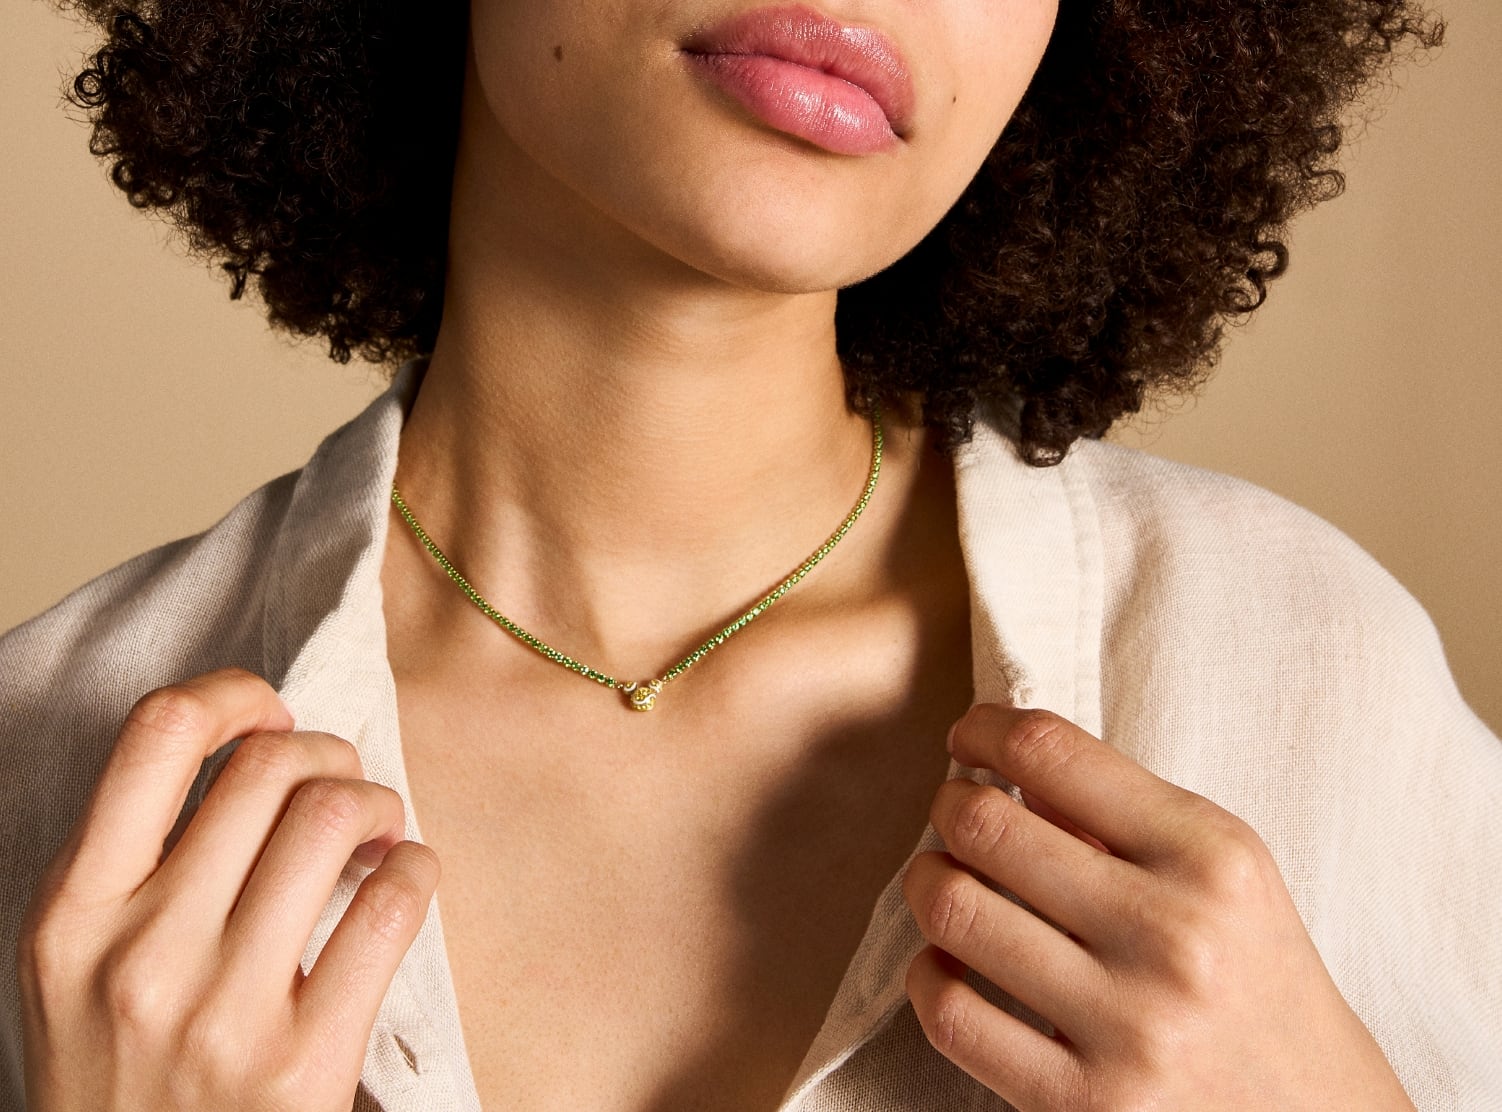 Image shows a woman wearing the necklace with a casual button down shirt. The necklace is shorter in length, just reaching her collarbone.